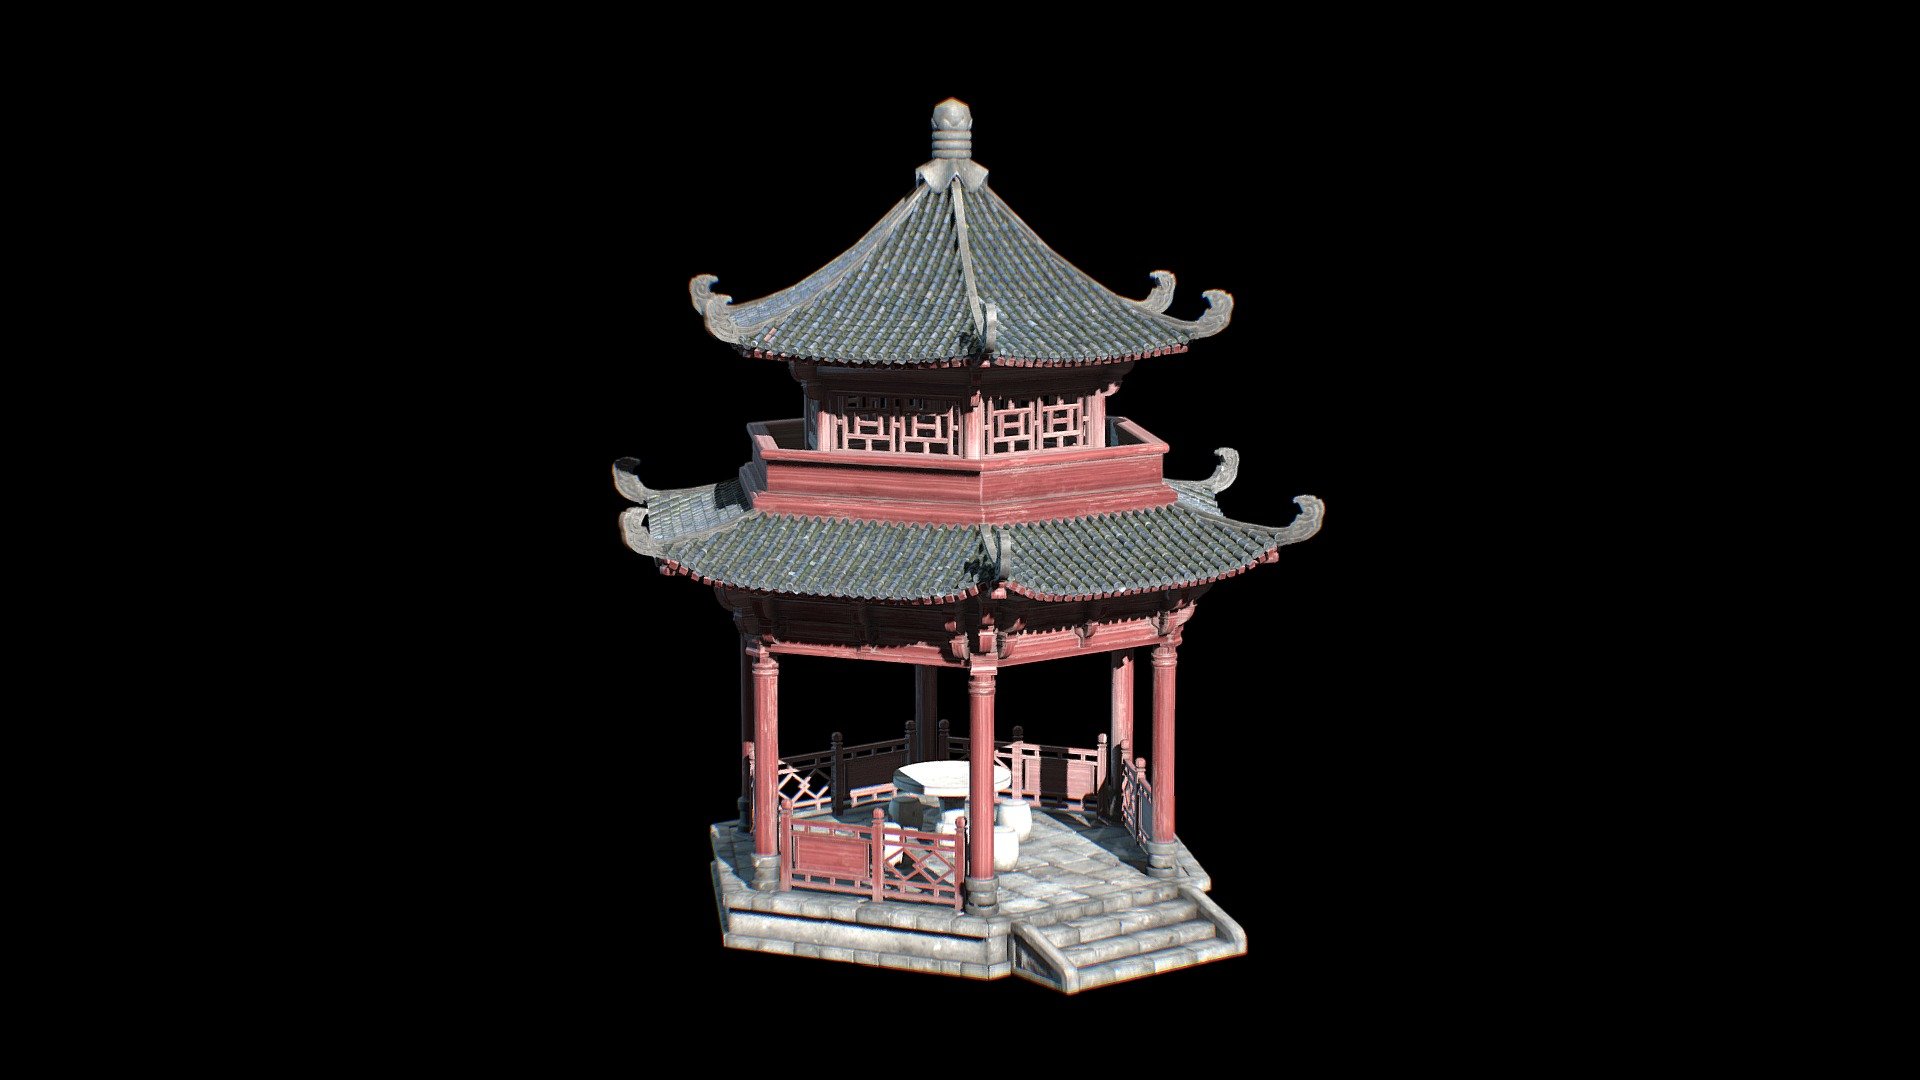 Free download：www.freepoly.org

If you like,Buy me a coffee maybe?
https://www.buymeacoffee.com/riveryang - Chinese Pavilion-Freepoly.org - Download Free 3D model by Freepoly.org (@blackrray) 3d model